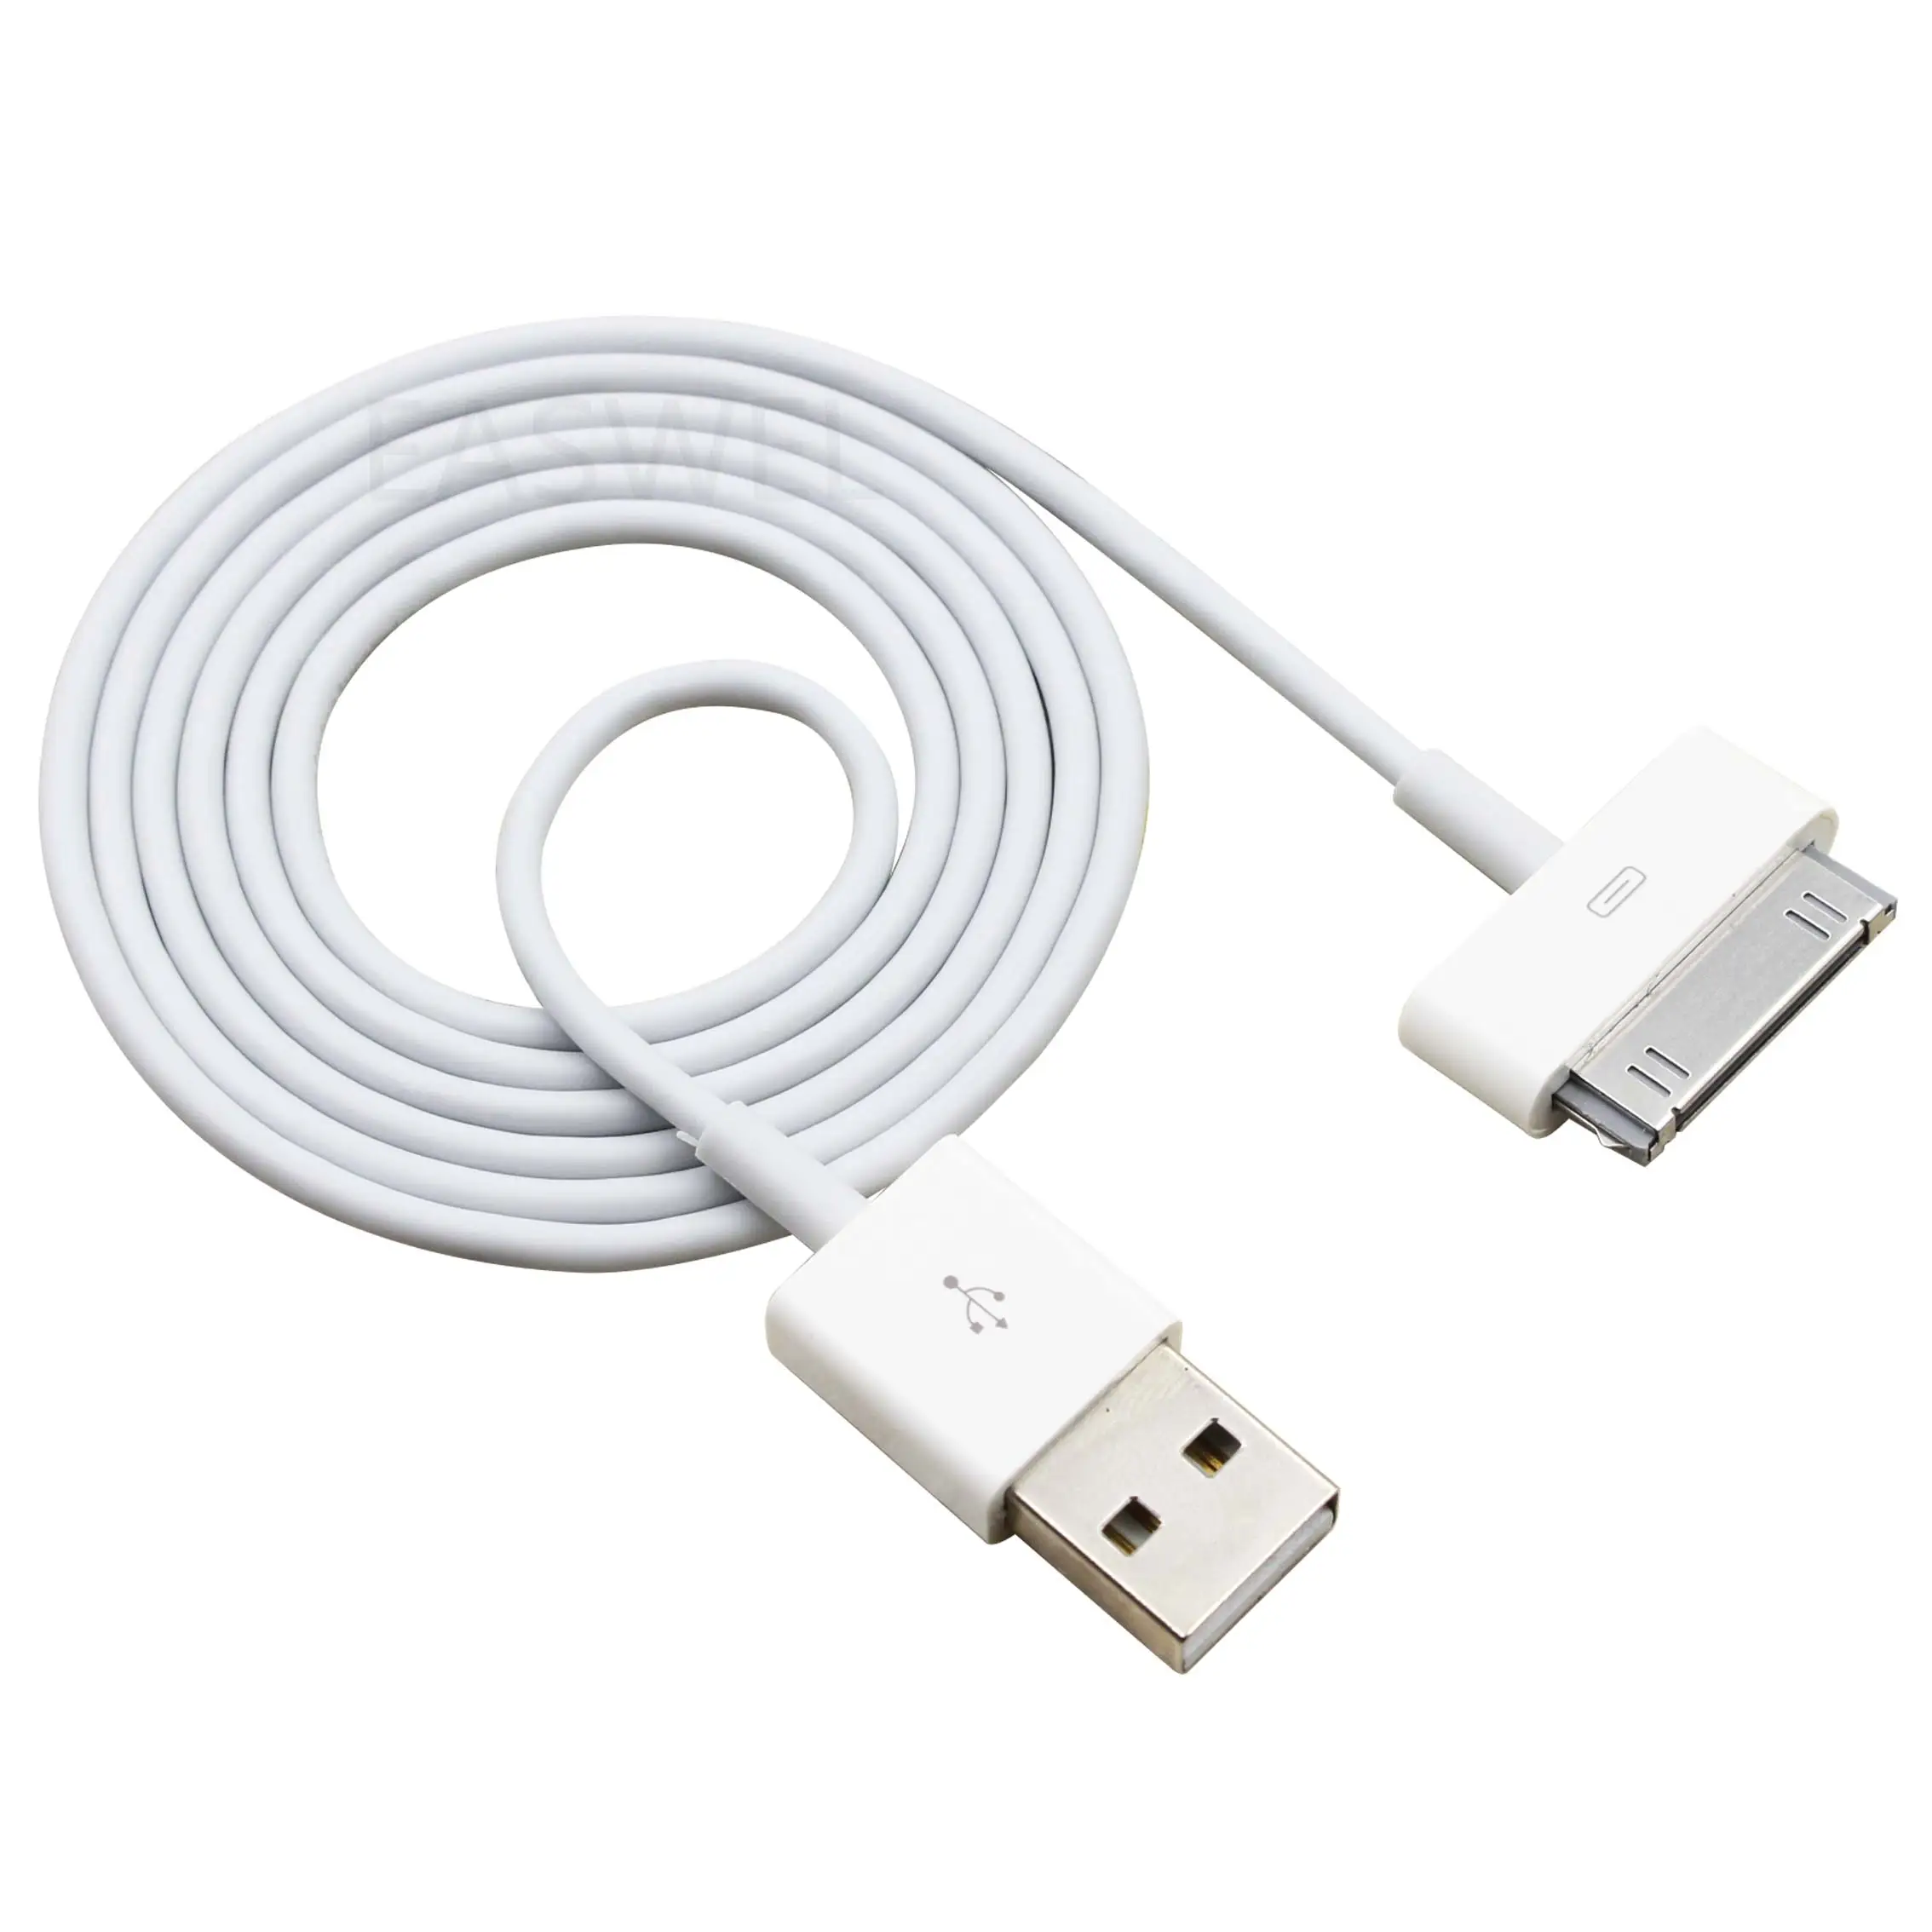 Usb Charger Cable Apple Ipod Classic Series 5th Generation Ipod 30gb 60gb - Ac/dc Adapters - AliExpress